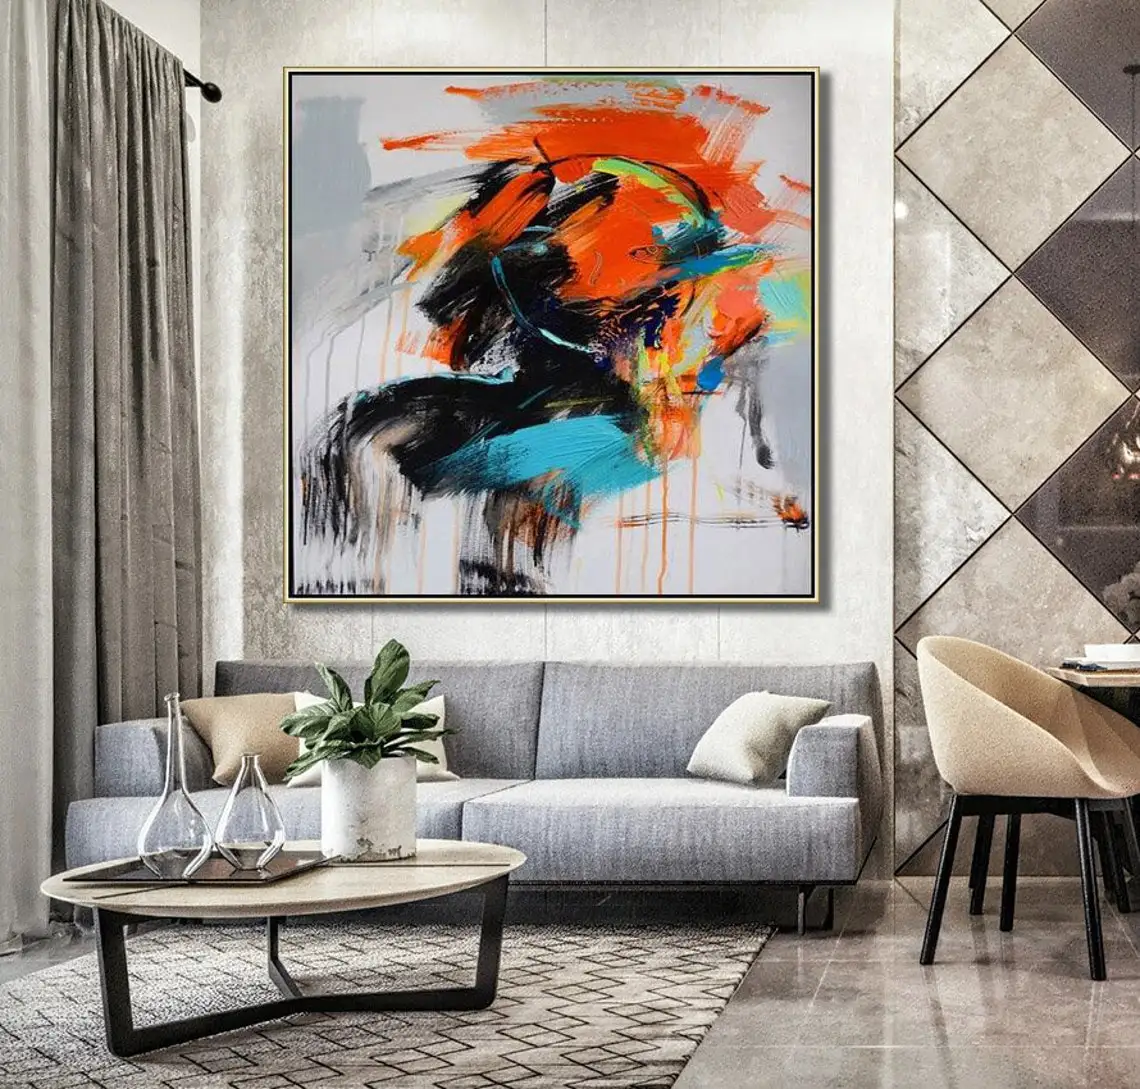 Large Abstract Hand Painted Oil Painting On Canvas Modern Textured Colorful Wall Art Home Decor